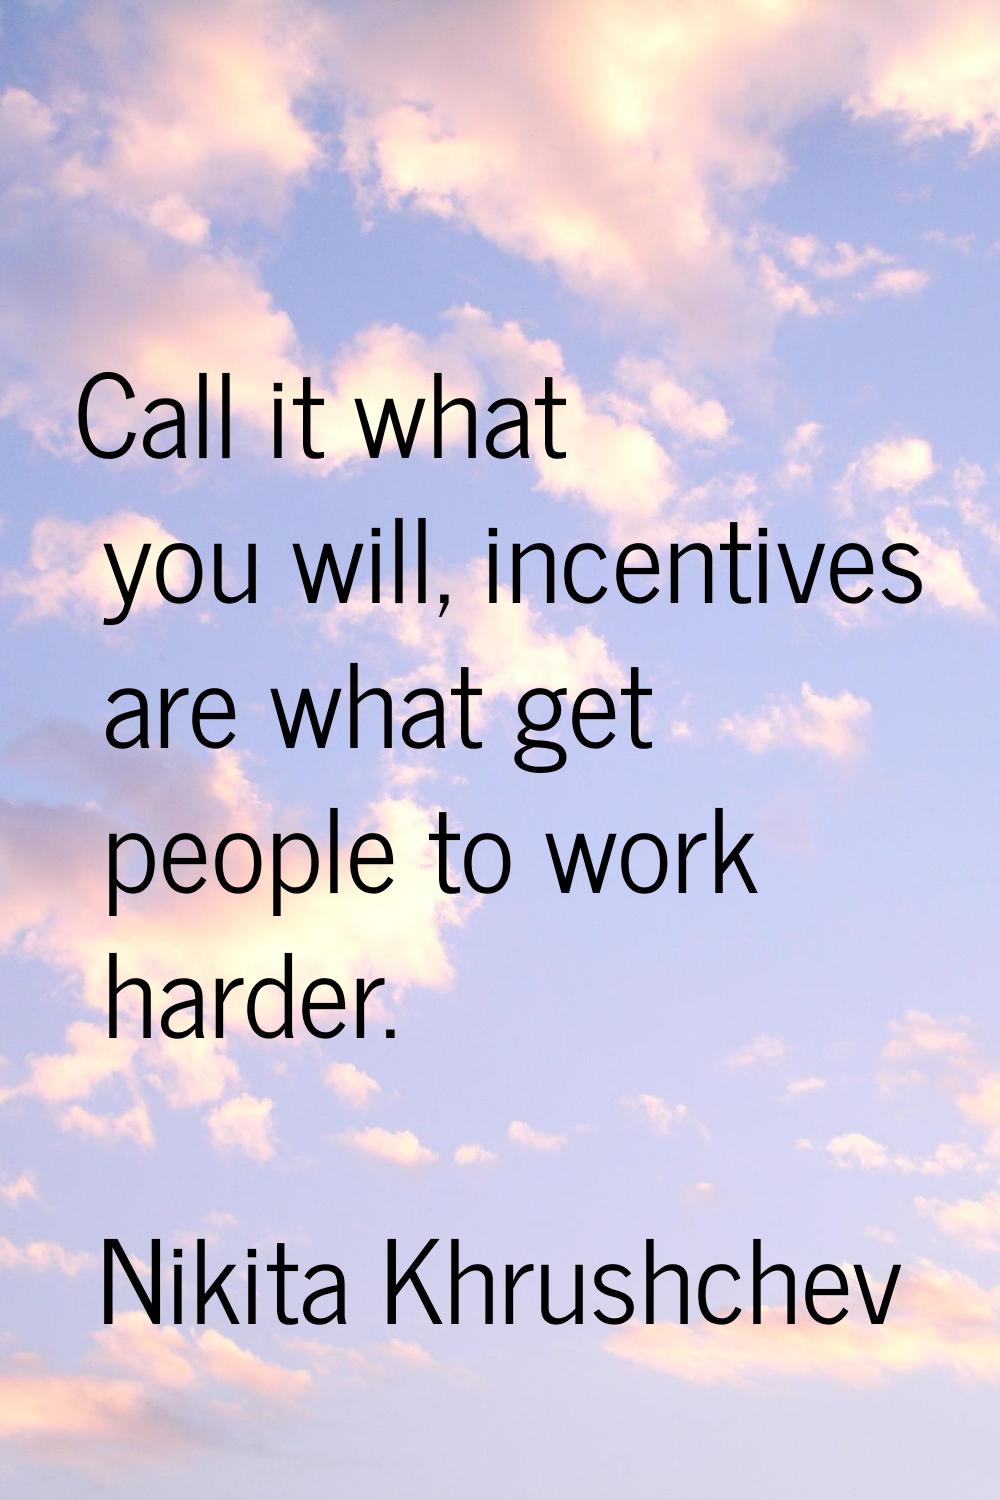 Call it what you will, incentives are what get people to work harder.